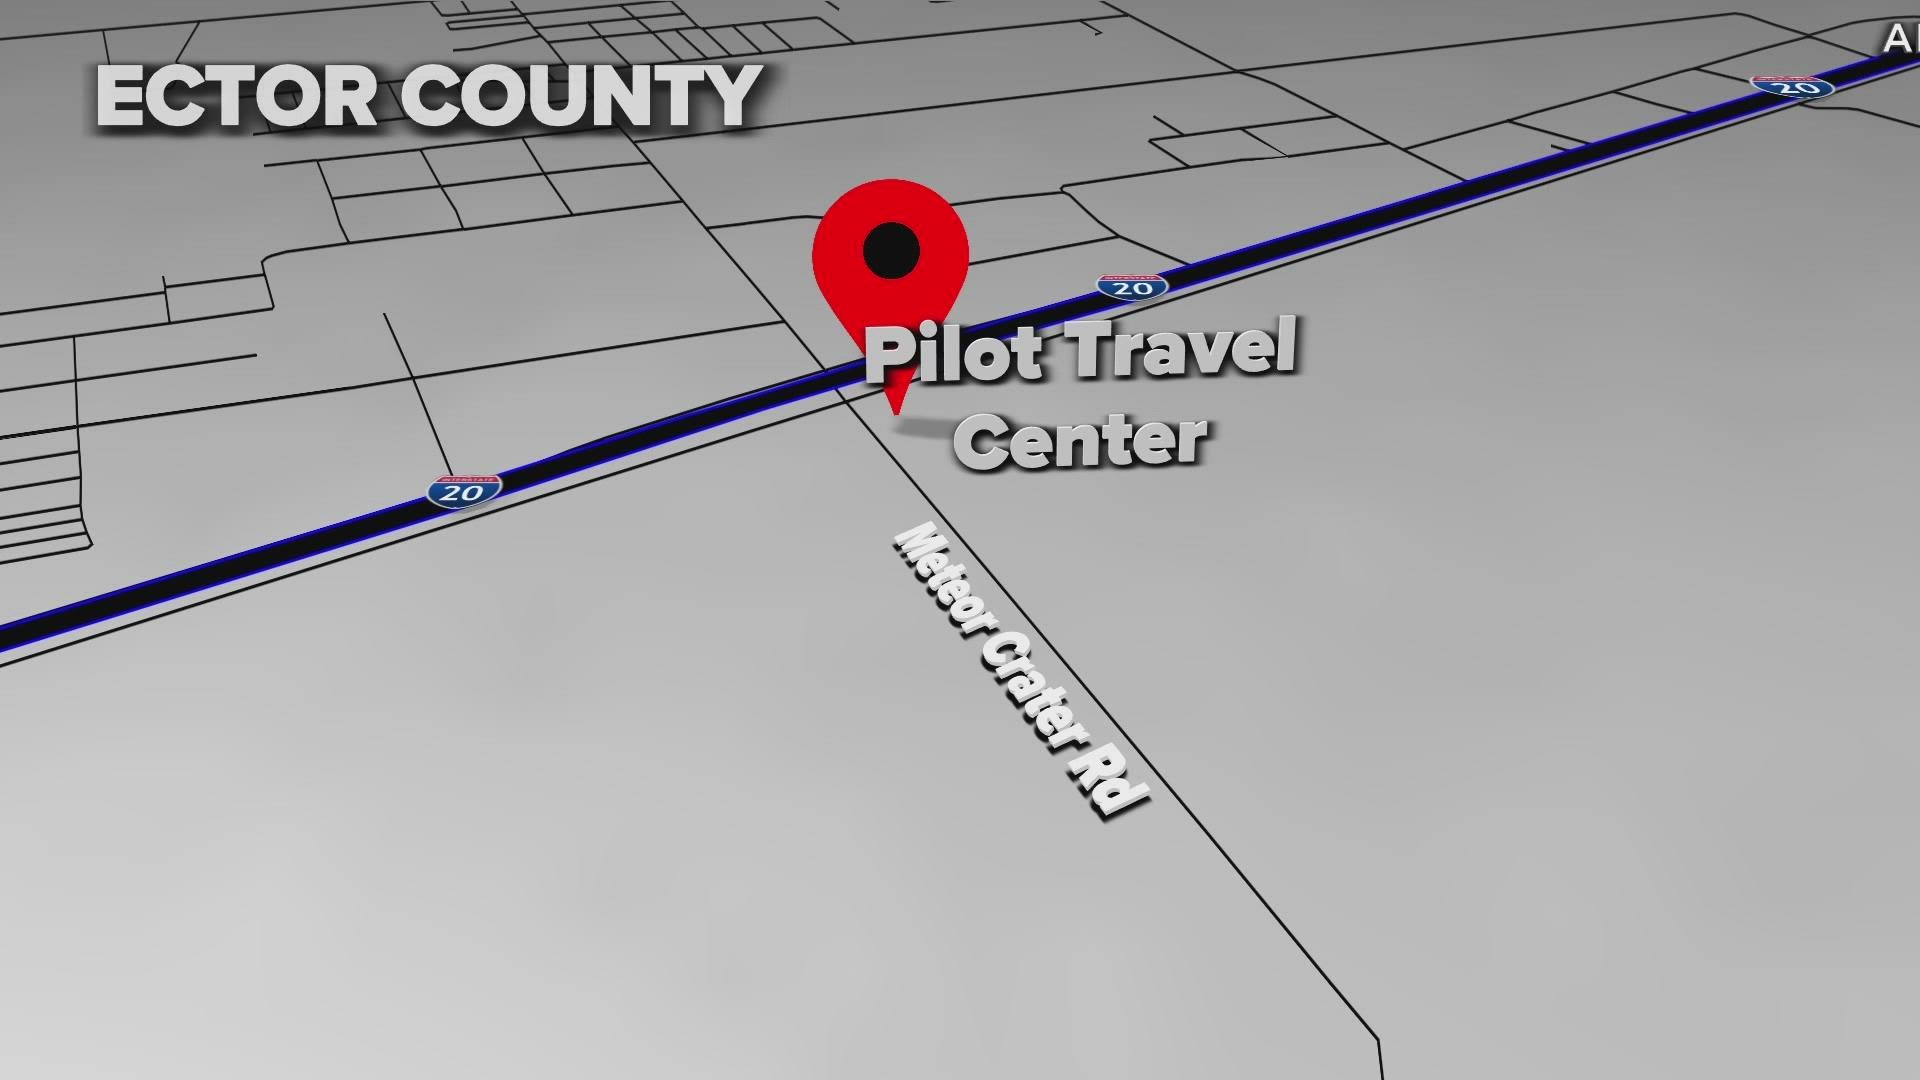 The Ector County Sheriff’s Office said Pilot truck stop employees have reported unmarked buses unloading migrants in the parking lot late at night.